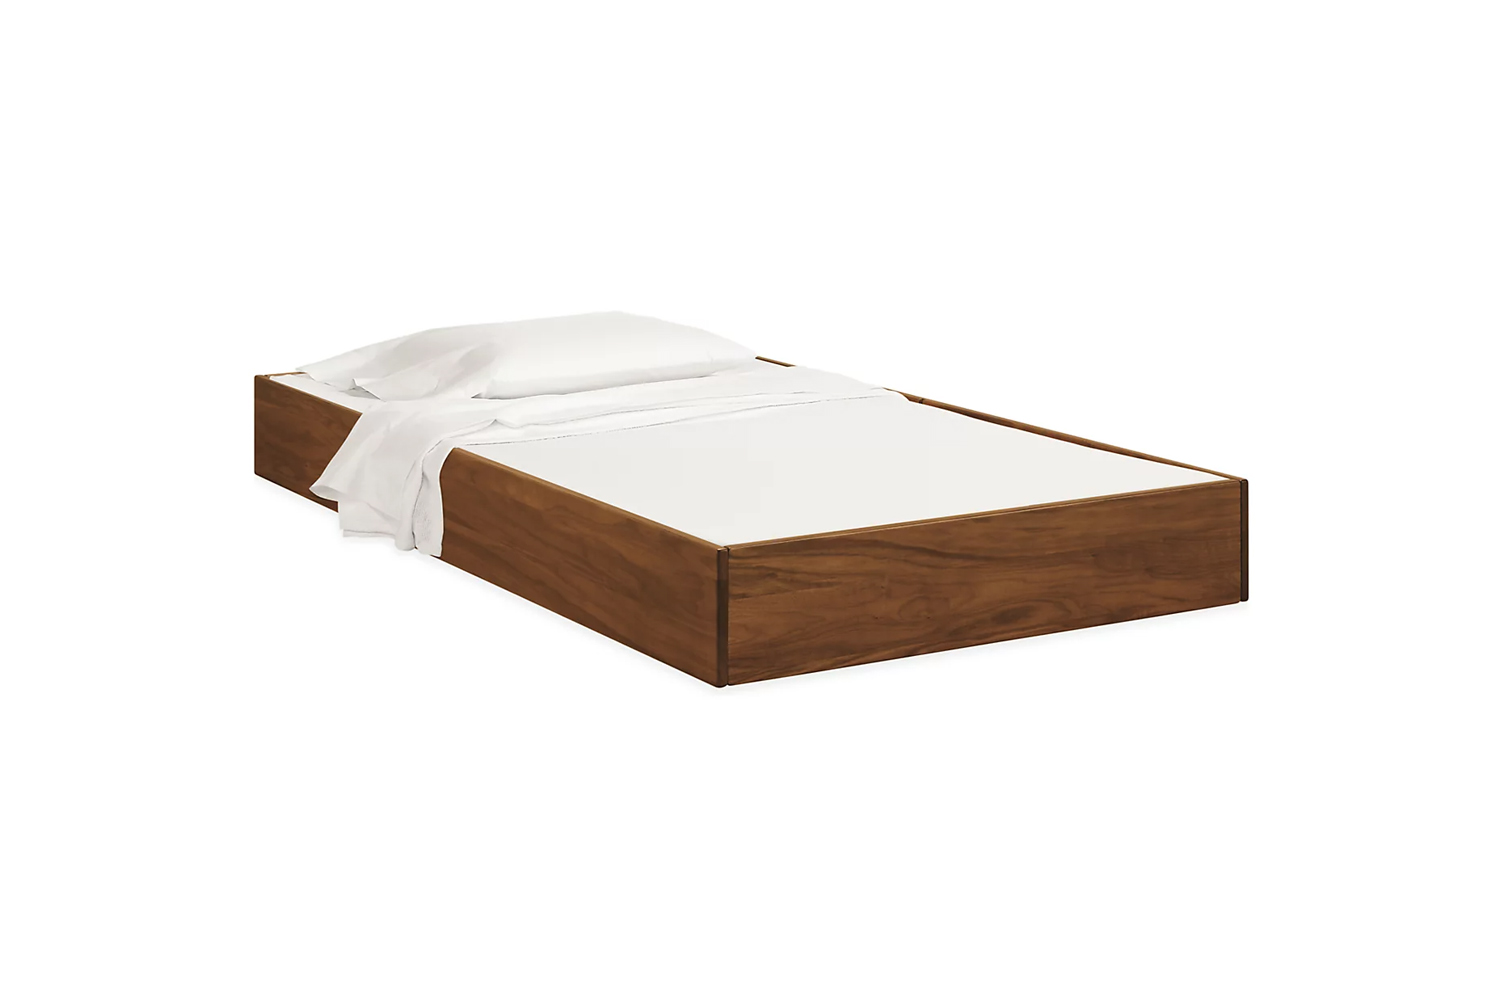 also available to accompany the bed is the wood trundle bed in walnut for \$699 12